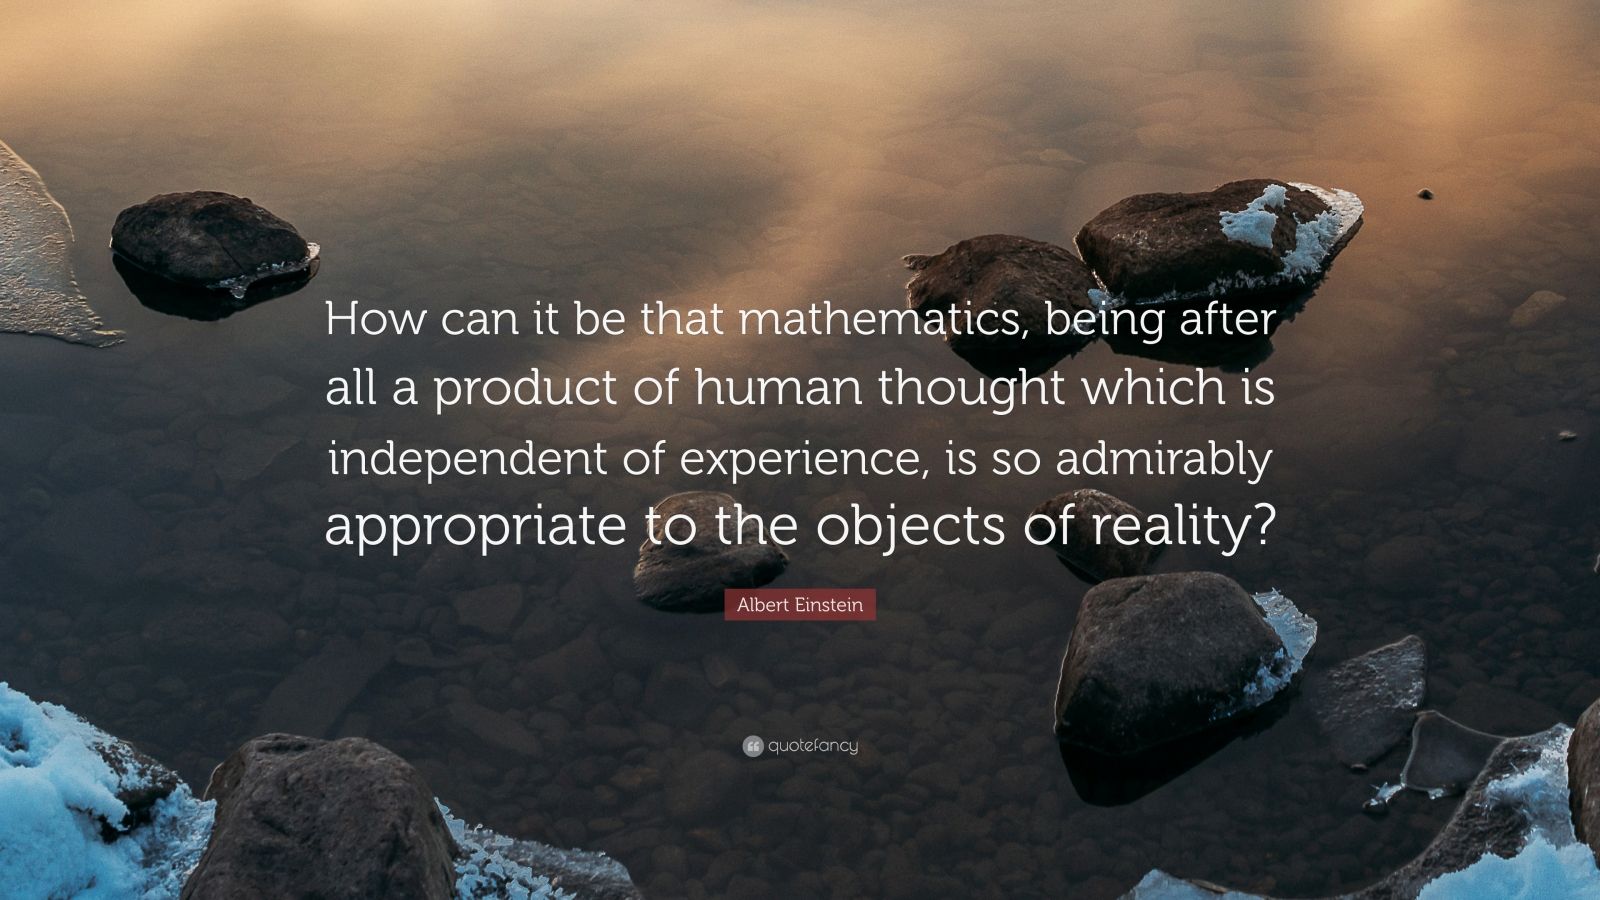 Albert Einstein Quote: “How can it be that mathematics, being after all